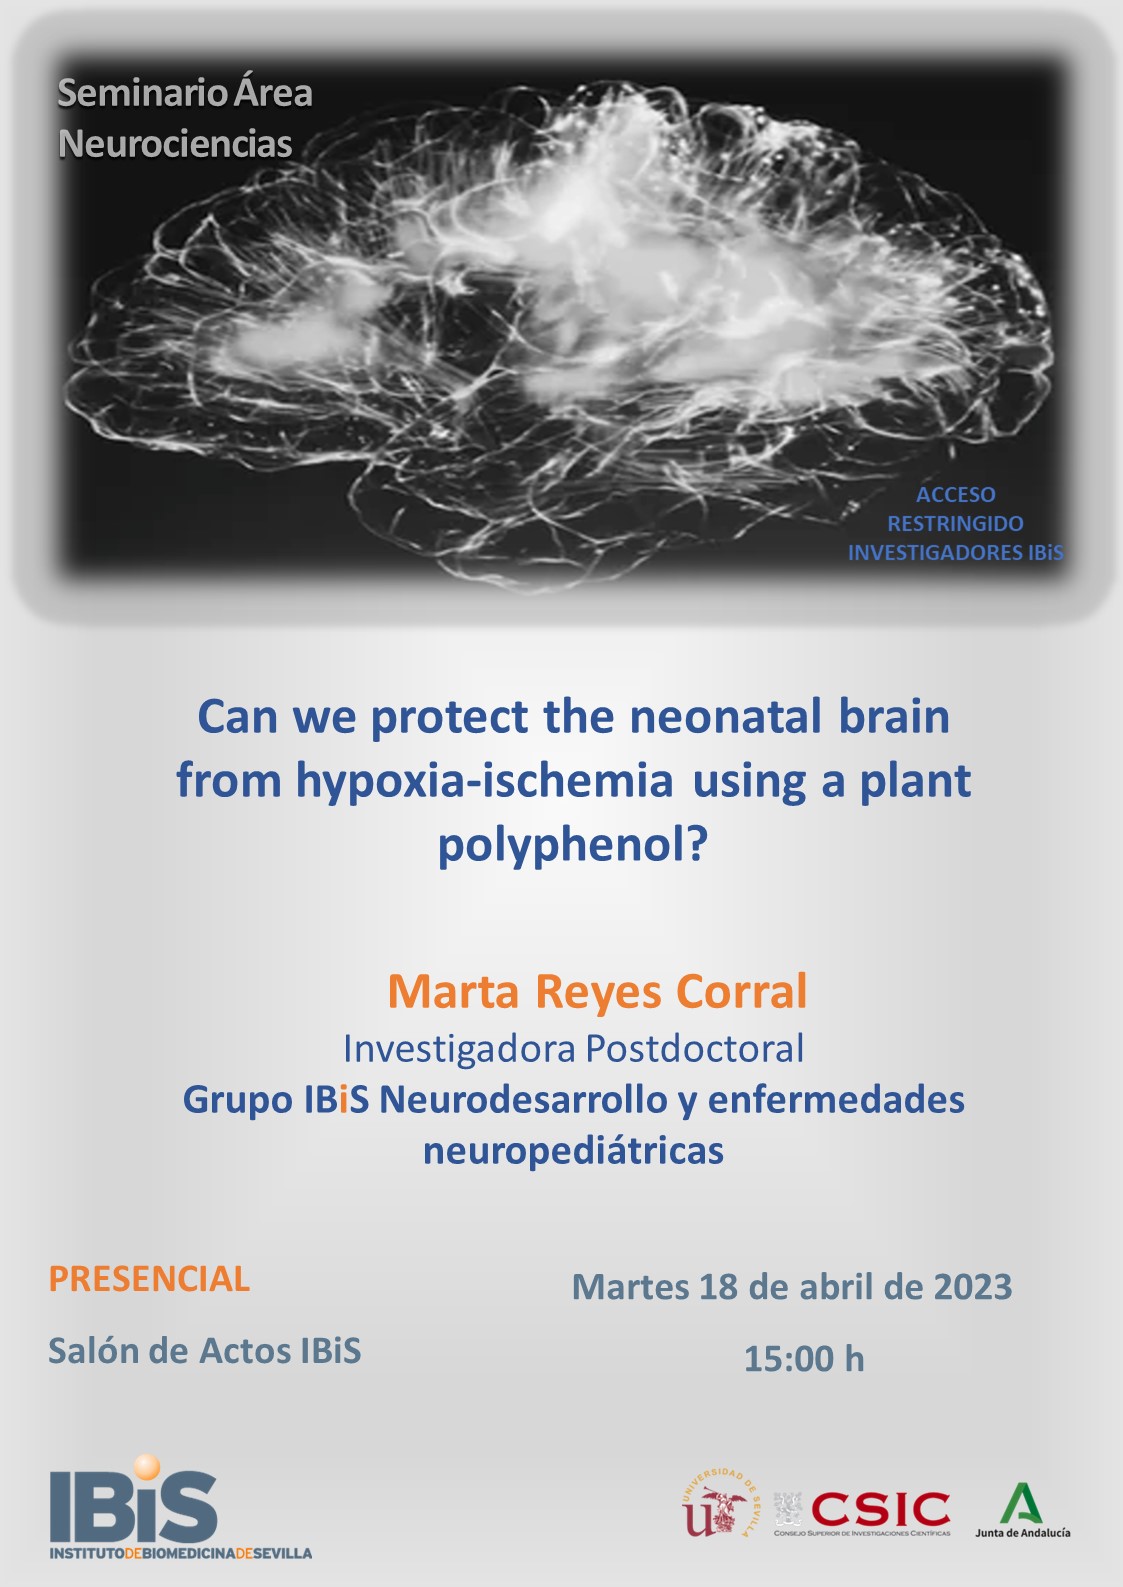 Poster: Can we protect the neonatal brain from hypoxia-ischemia using a plant polyphenol?